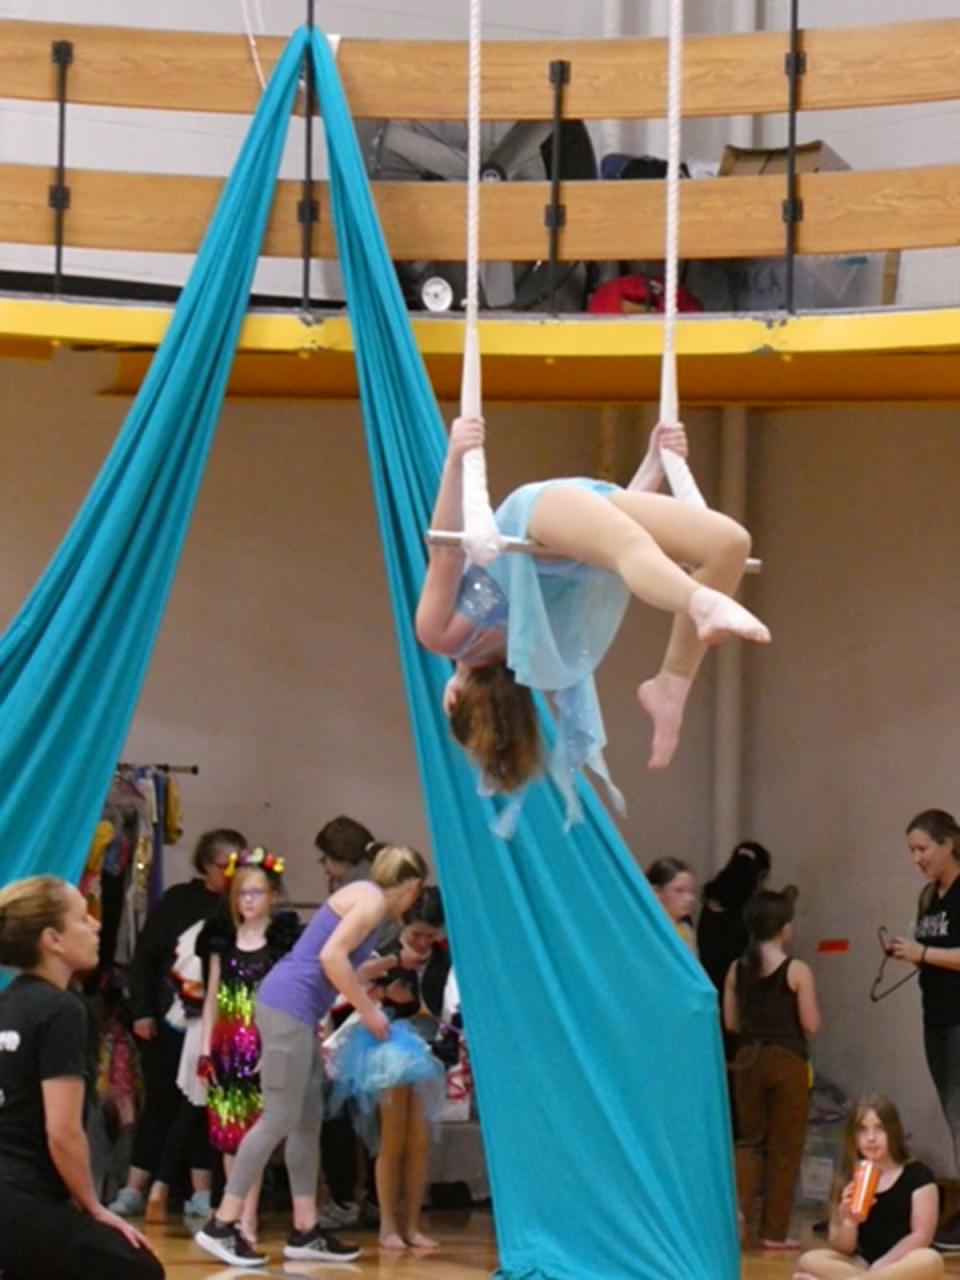 A performer on a trapeze.